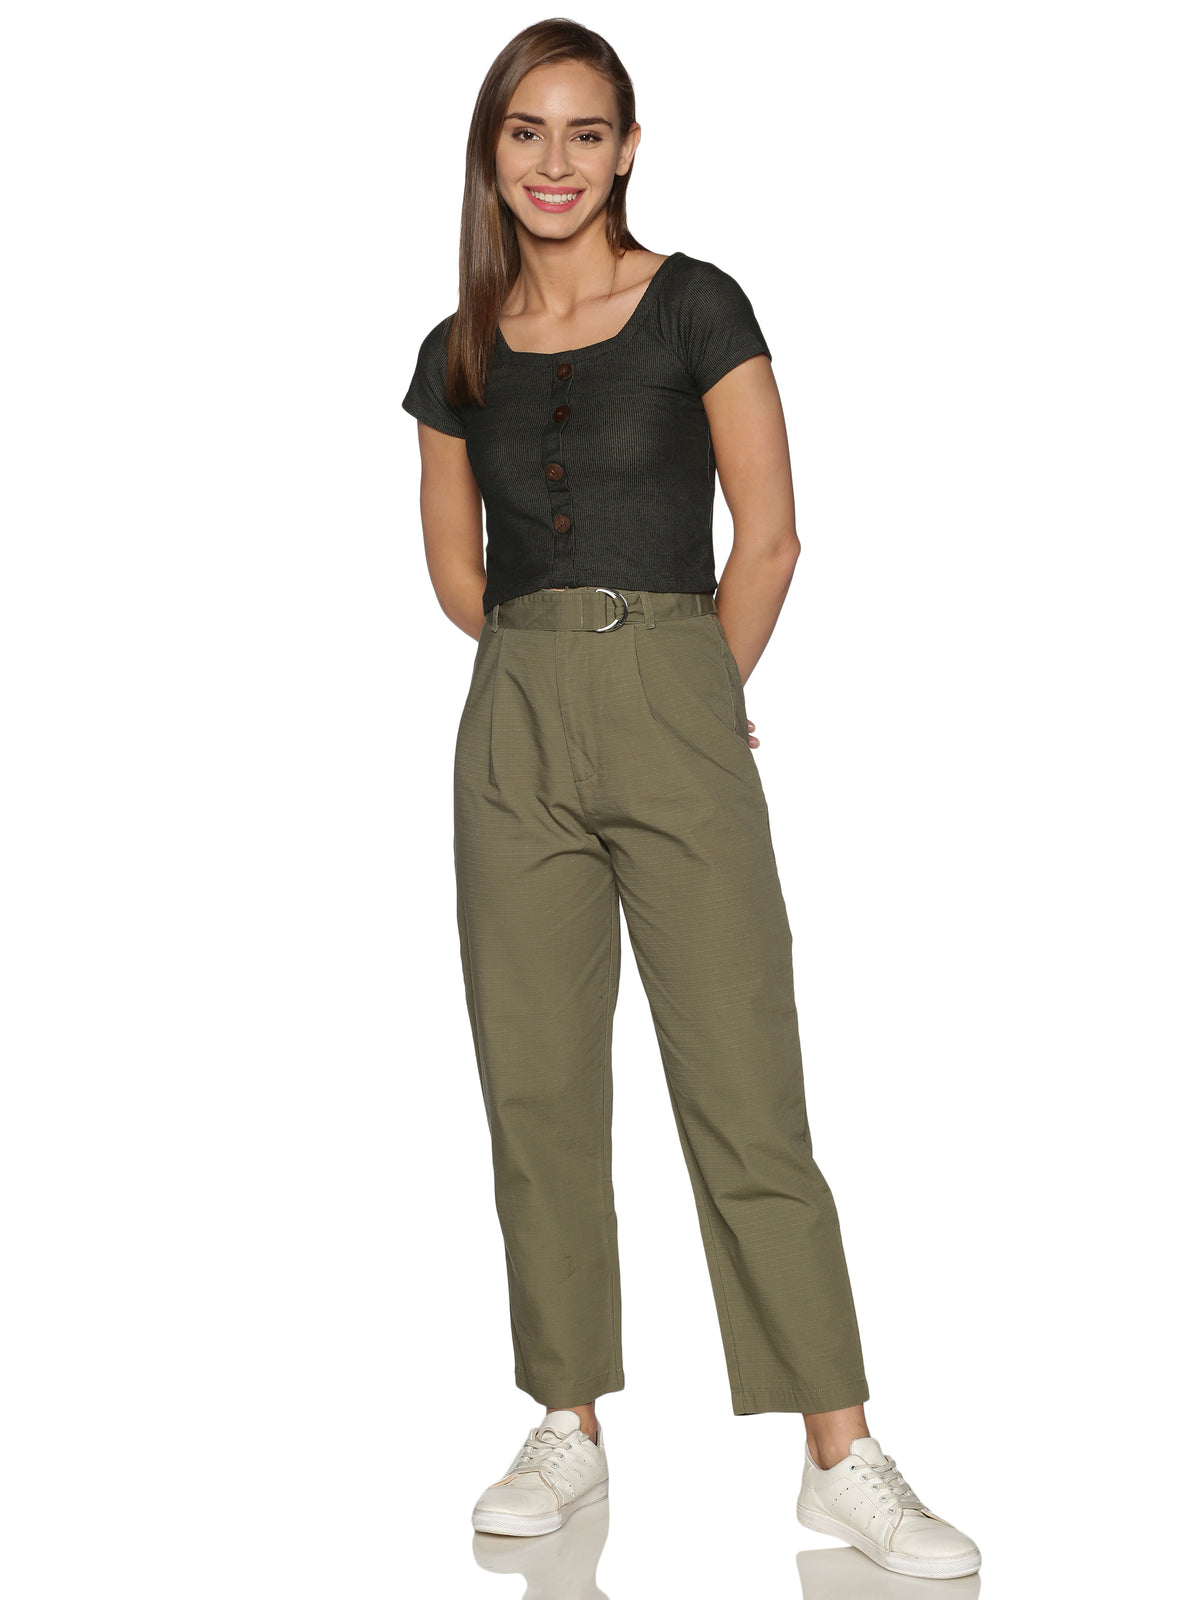 Buy ENNOBLE Women's High Waist Cotton Blend Lycra Trouser with Button and  Zip Closure, Front Welt Pocket and Back Waist Darts, Narrow Fit, Ankle  Length, Semi Formal and Formal Wear|Khaki at Amazon.in